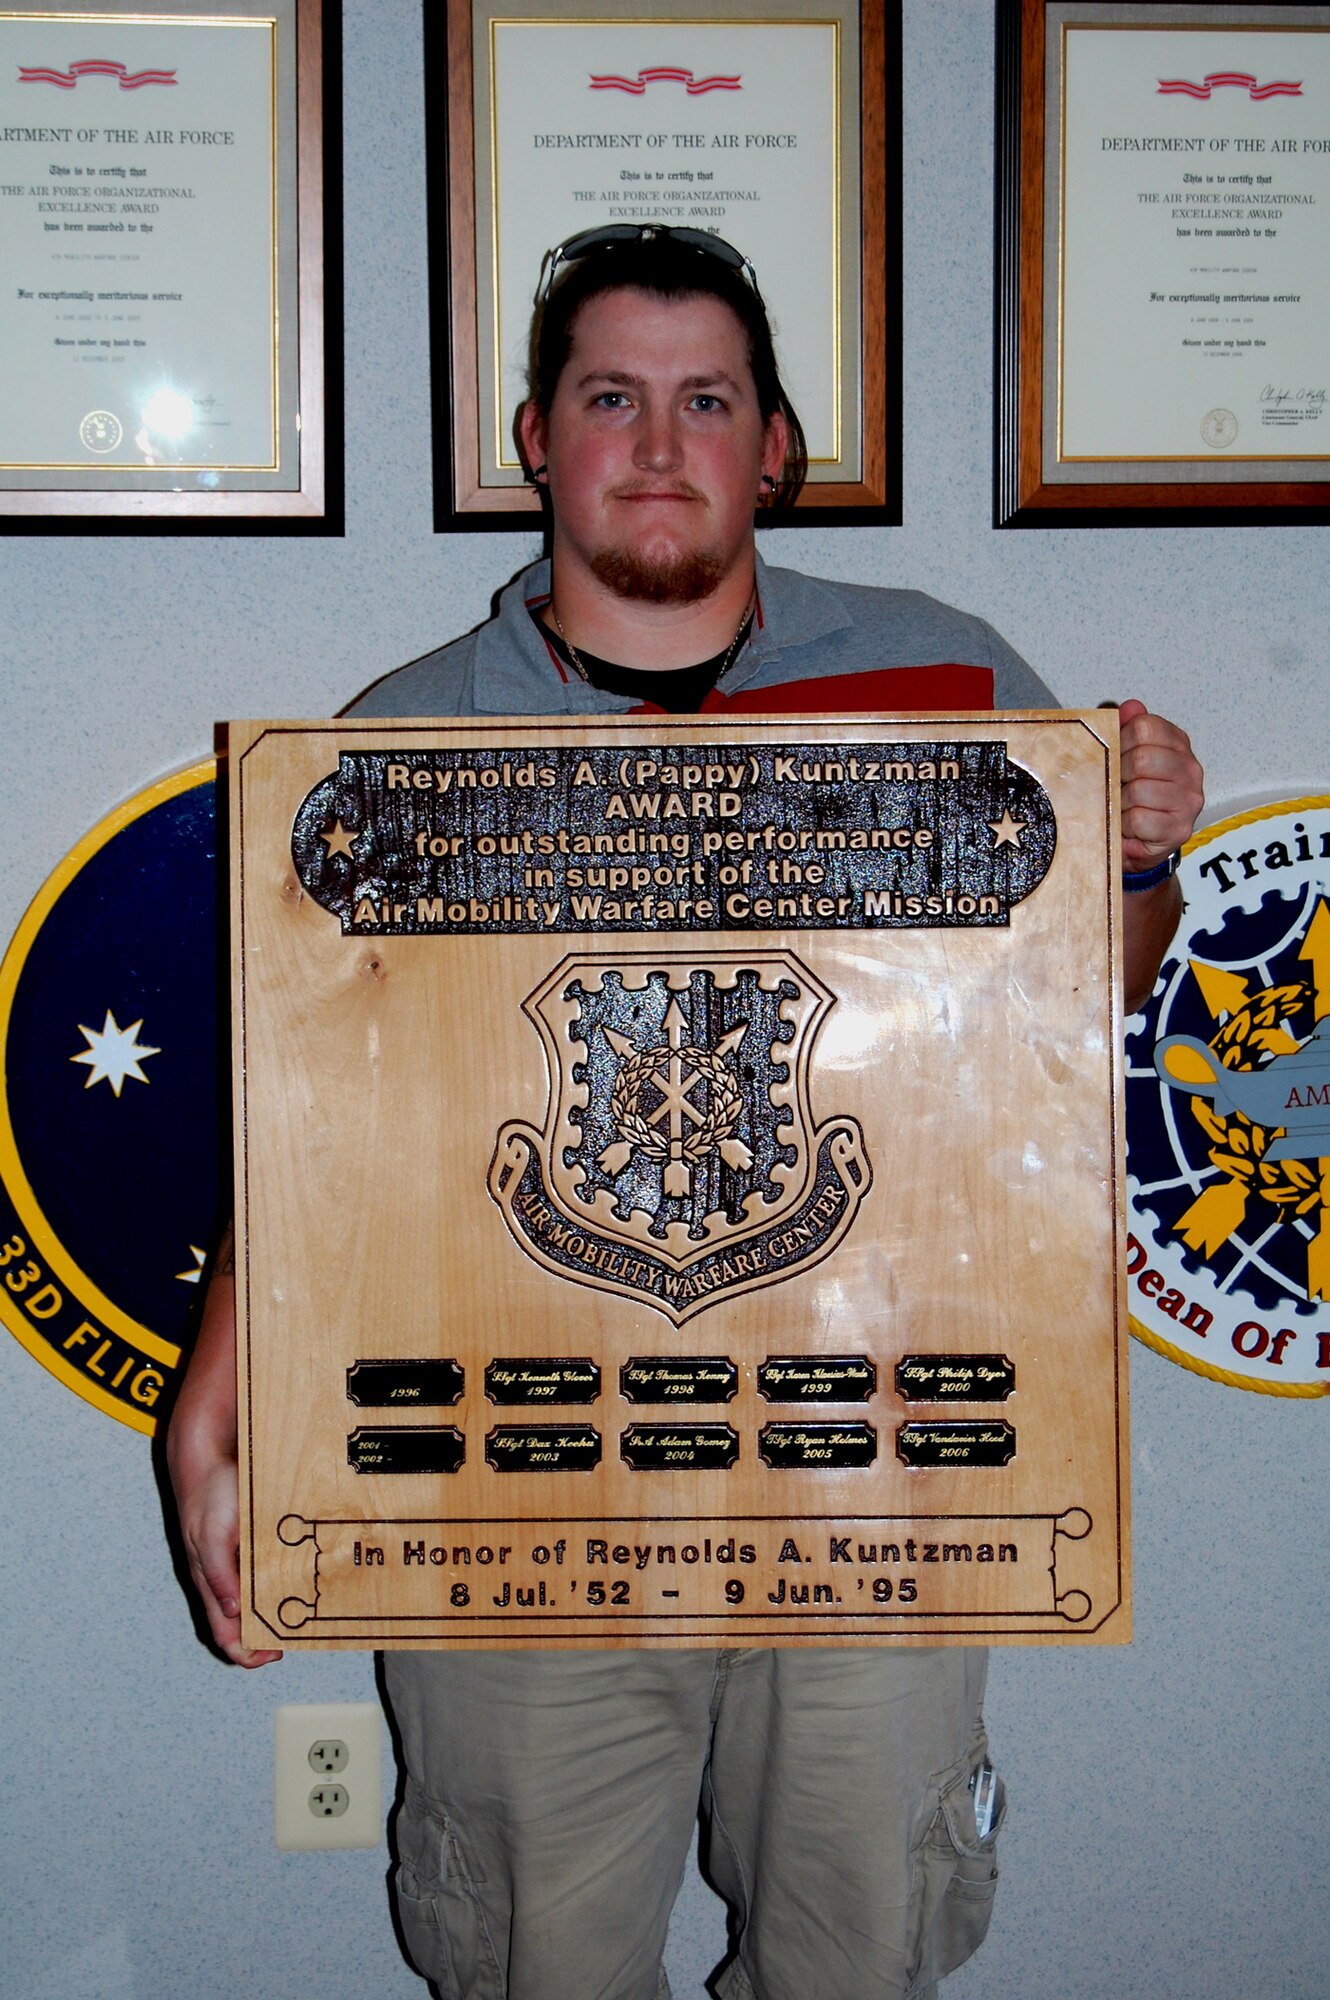 Jeremy Kuntzman, 29, from Manasass, Va., holds the plaque bearing his father's name, former Tech. Sgt. Reynolds A. Kuntzman, during a visit to the U.S. Air Force Expeditionary Center Aug. 21, 2008.  Sergeant Kuntzman died on June 9, 1995, while assigned to the center with the 421st Ground Combat Readiness Squadron.  After his death, the center's leadership created the Reynolds A. Kuntzman Duty performance award given annually to an Airman in the grades of E-1 through E-6 recognizing superior duty performance in support of the center's mission and community.  (U.S. Air Force Photo/Tech. Sgt. Scott T. Sturkol)